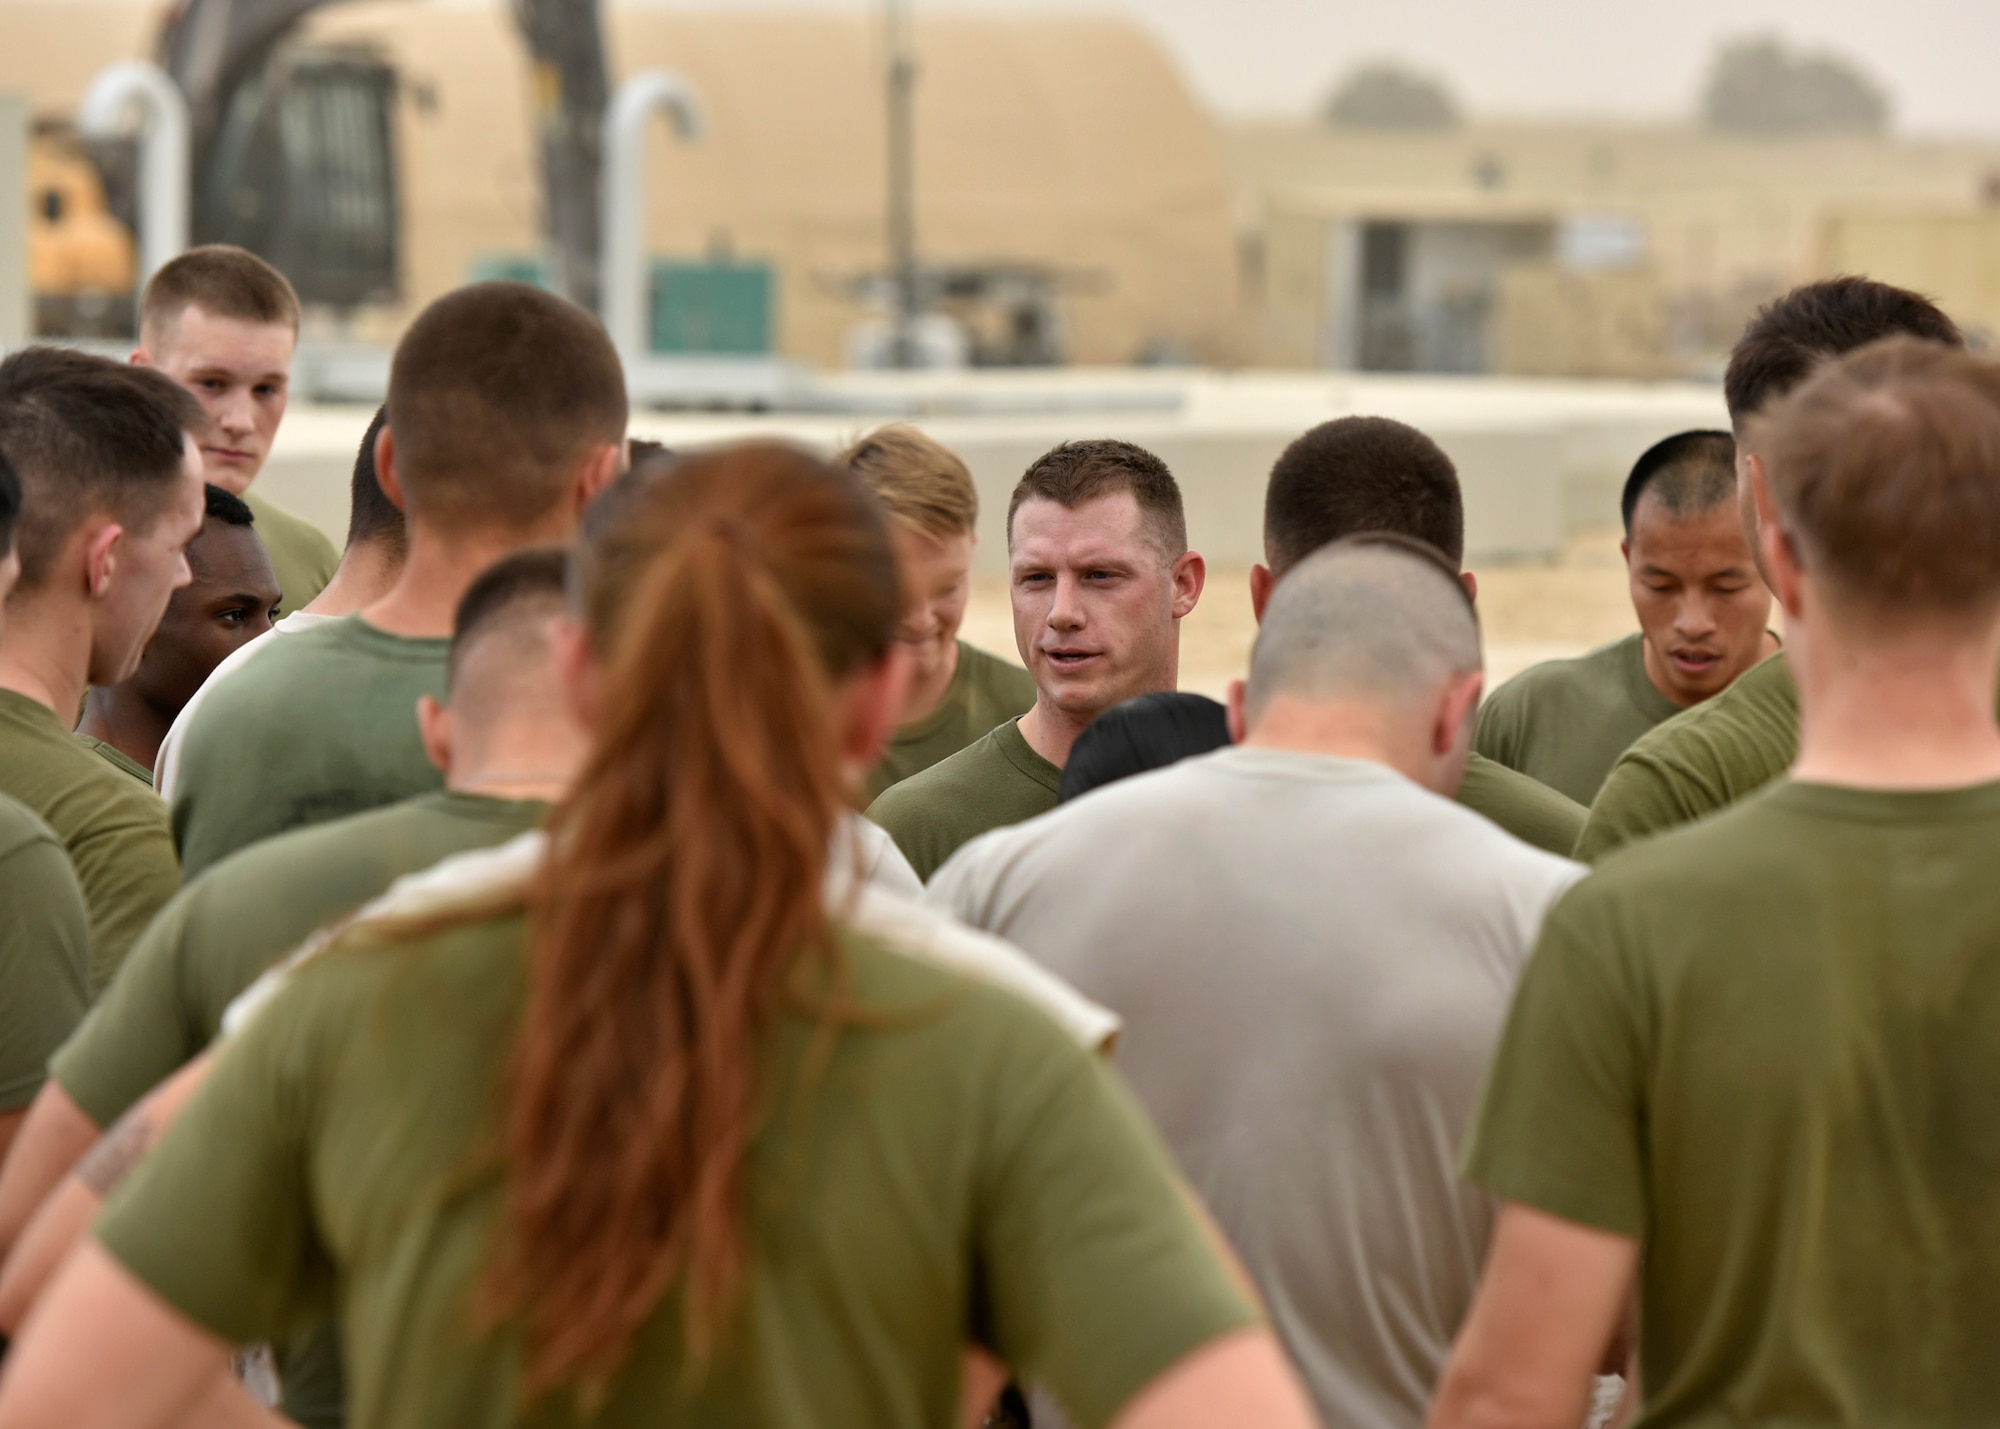 U.S. Marine Corps Staff Sgt. Ryan Prosper, 1st Battalion 7th Marines and Corporal’s Course instructor, mentors Airmen and Marines after a Corporal’s Course physical training session April 29, 2017. The corporal’s course is a 14-day formal training event designed to educate Marine corporals on the duties and responsibilities of an NCO. Deployed Airmen were granted the opportunity to attend the course, which is an eligibility requirement for Marines before promoting to the rank of sergeant. (U.S. Air Force photo by Senior Airman Ramon A. Adelan)